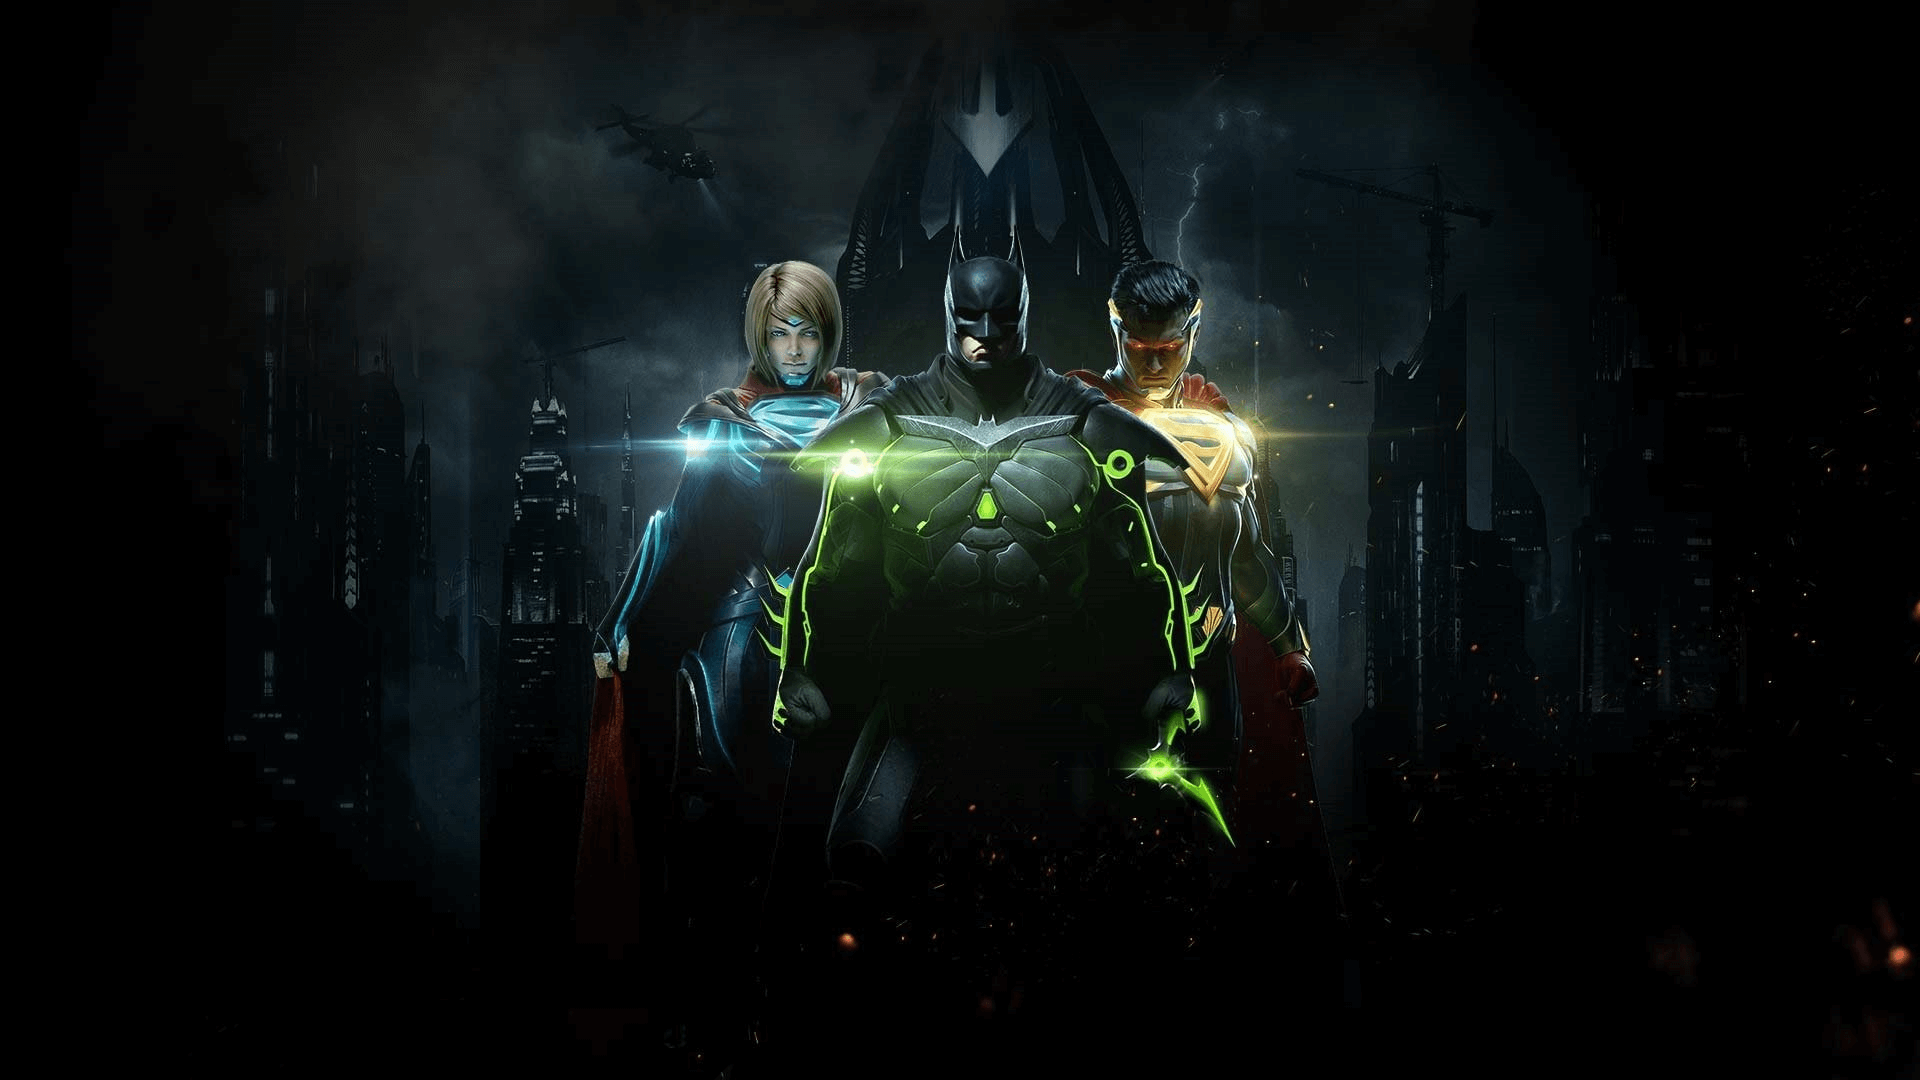 Denuvo removed from Injustice 2